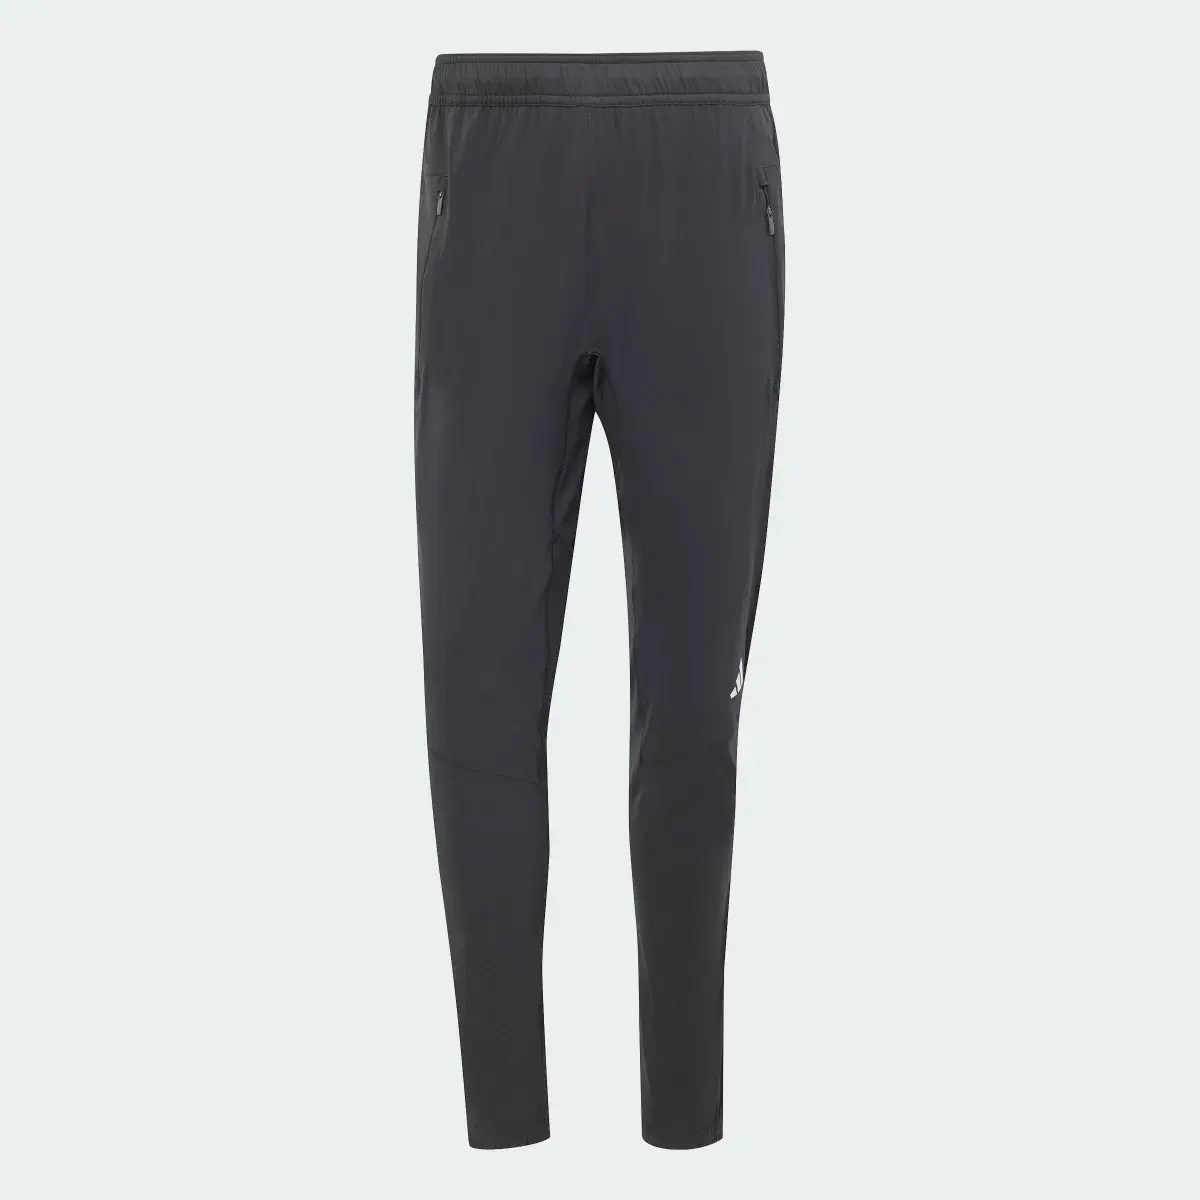 Adidas Designed for Training Workout Pants. 3